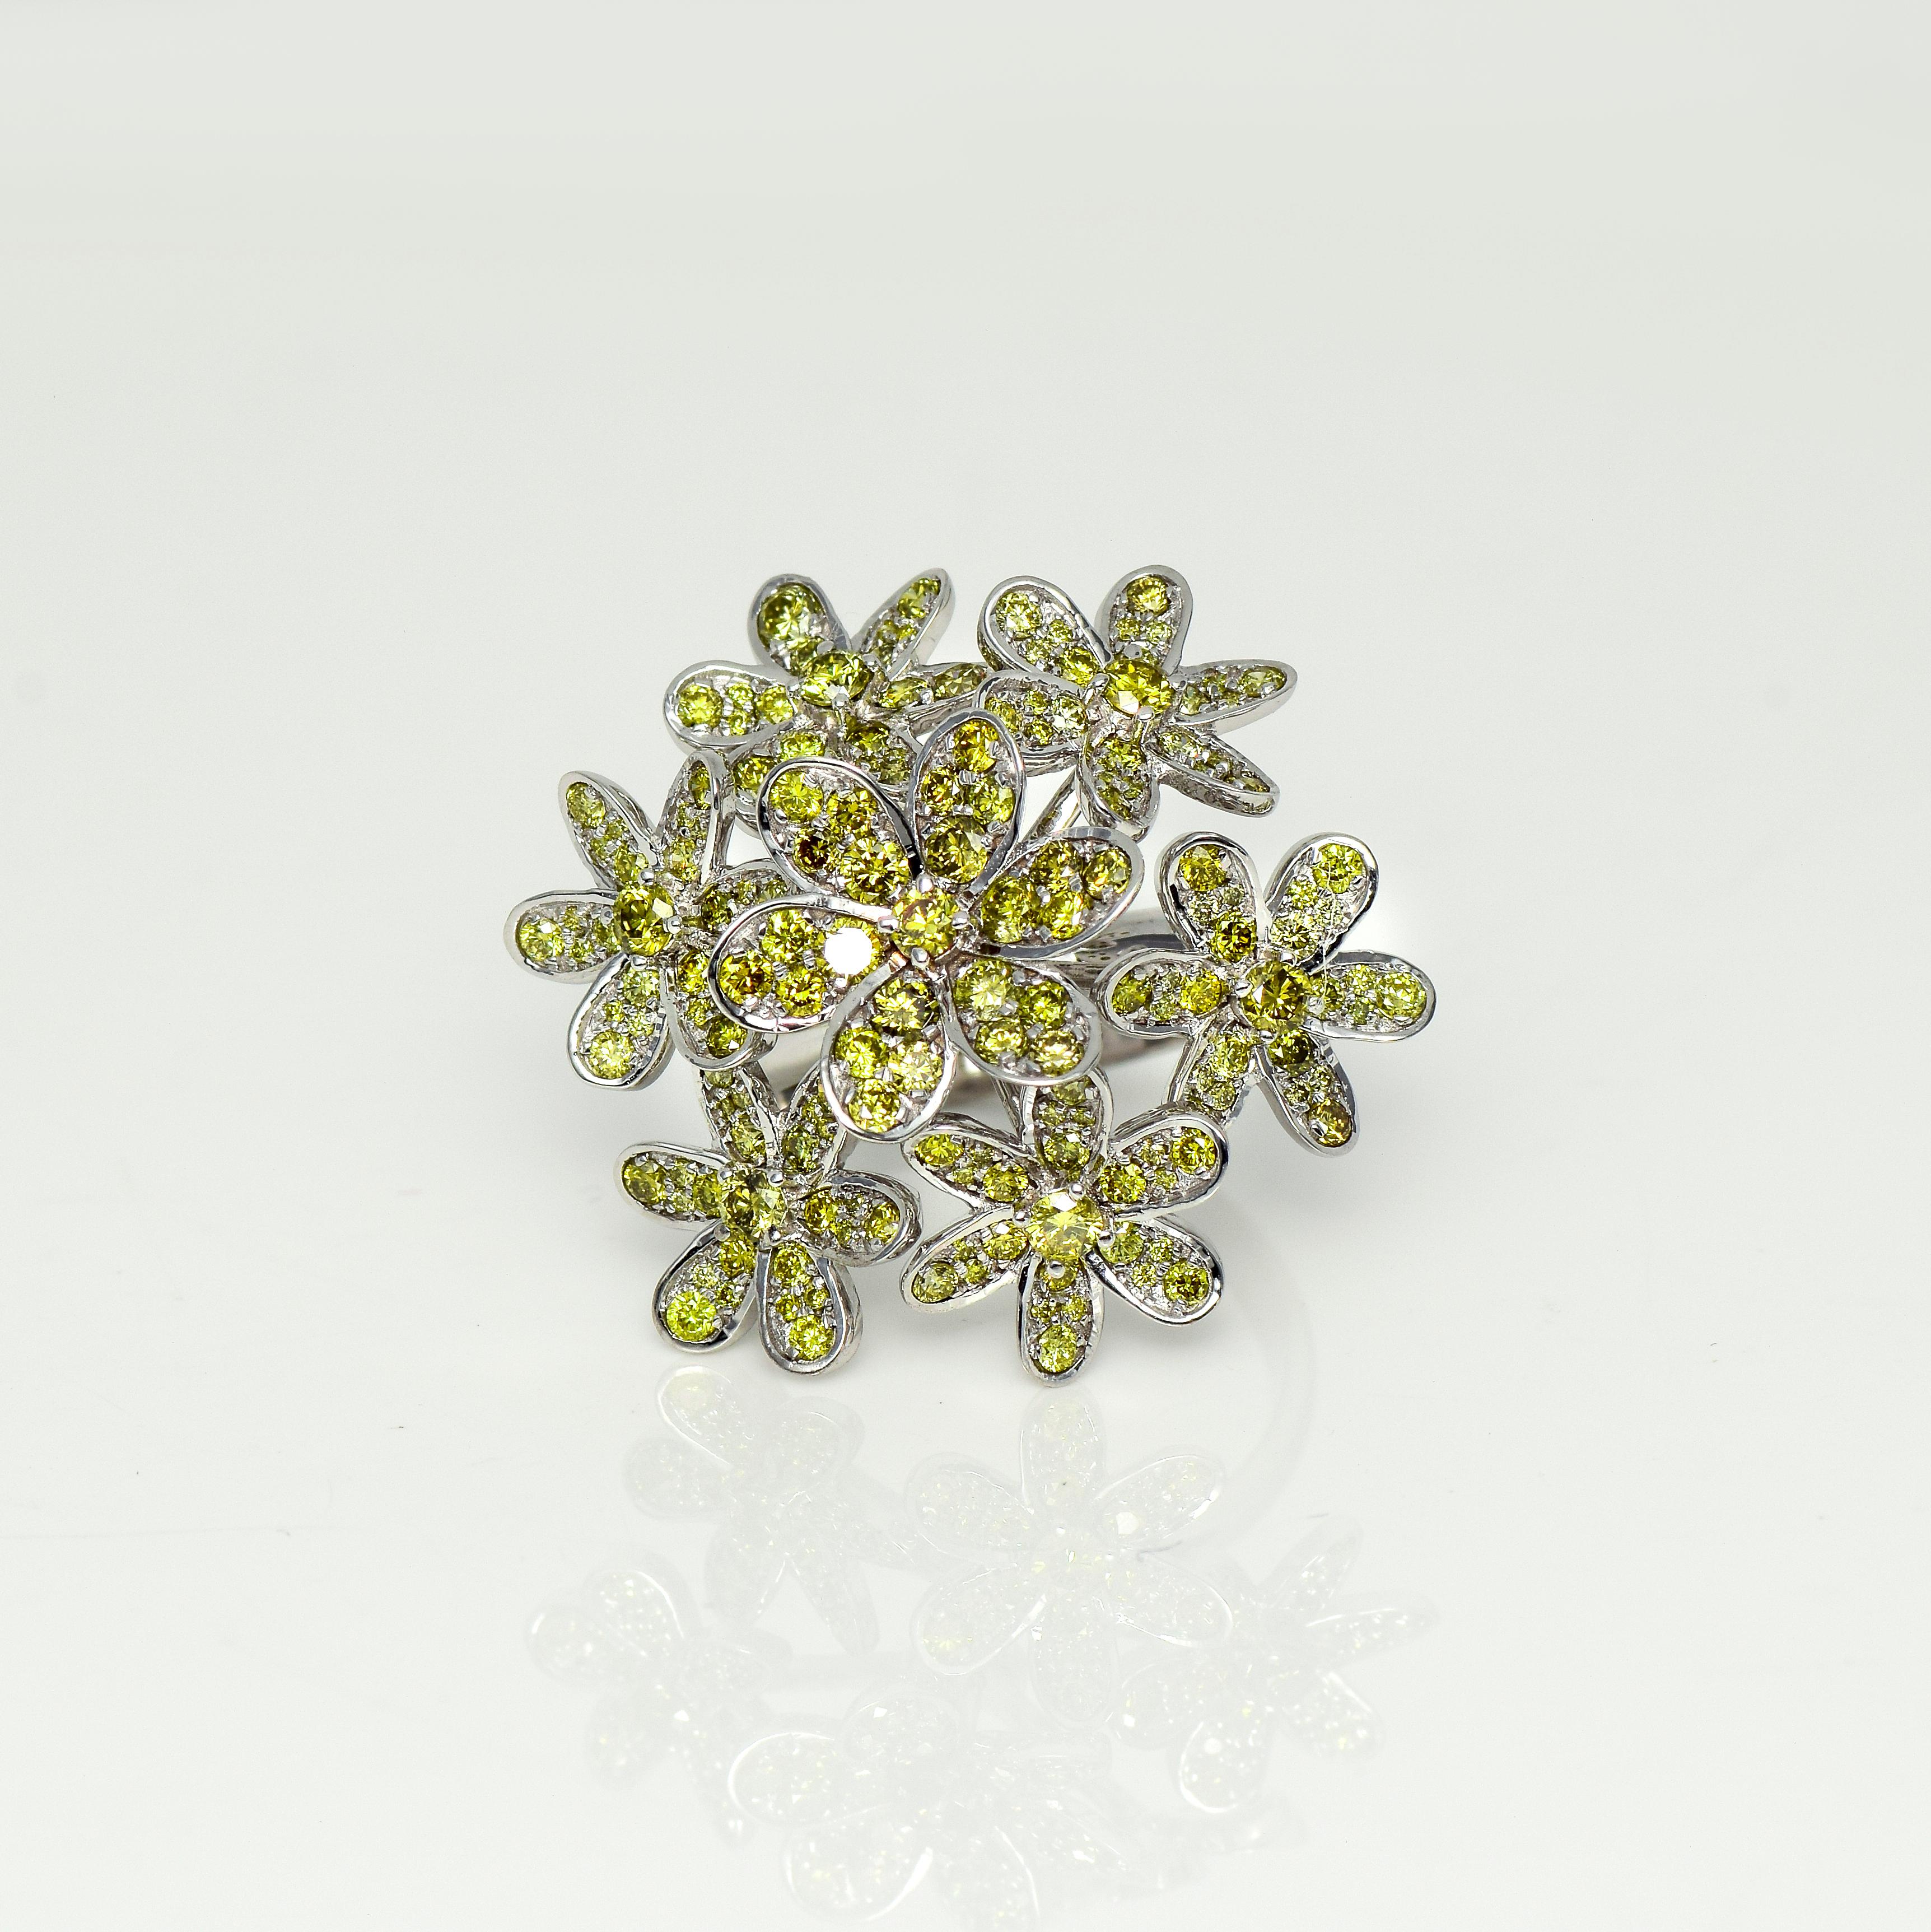 *IGI 18K 2.06 Ct Natural Greenish Yellow Diamonds Flowers Cocktail Ring*

IGI-certified 6 isolated flowers with 169 pieces of fancy intense greenish yellow diamonds weighing 2.06 ct on the 18K white gold band, and the total ring weight is 9.18 grams